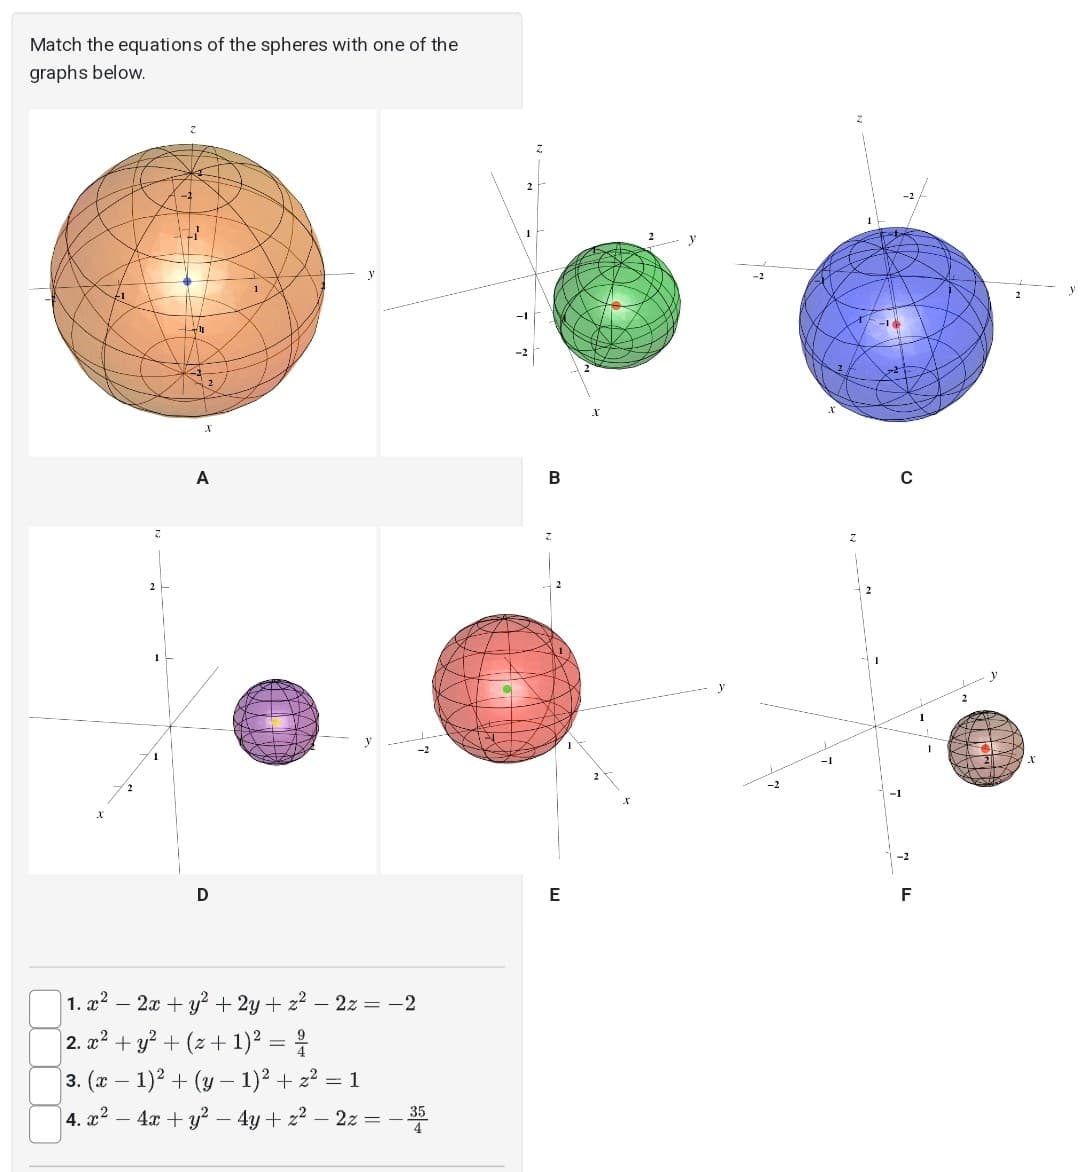 Match the equations of the spheres with one of the
graphs below.
-2
-3
2
x
A
D
1
| 1. x² − 2x + y² + 2y + z² - 2z = −2
-
2. x² + y² + (z+ 1)² = ²/
3. (x − 1)² + (y − 1)² + z² = 1
-
4. x² - 4x + y² - 4y + z² - 2z = -35
2
B
E
-16
-²
с
F
arre
X